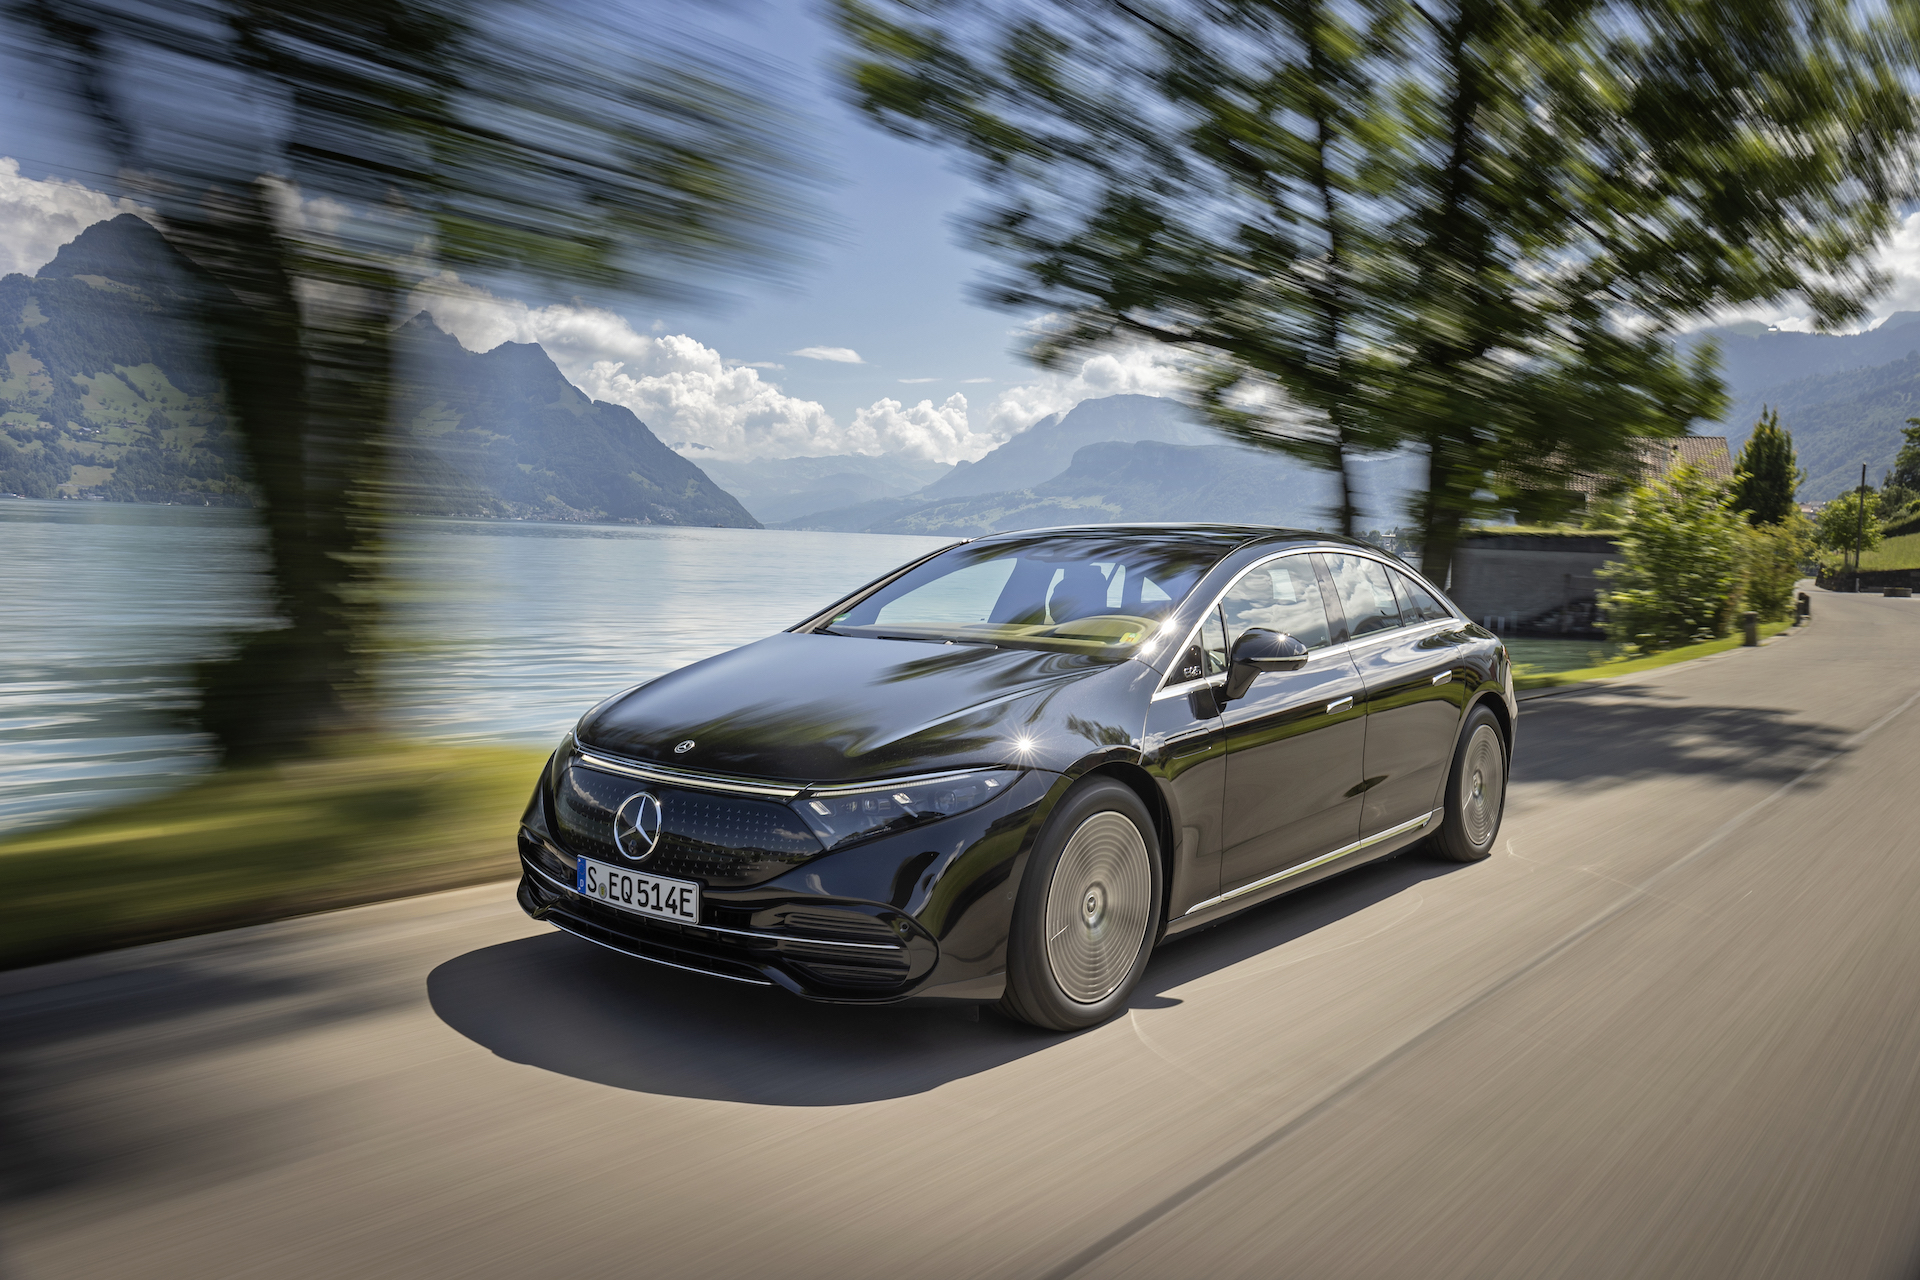 2022 Mercedes-Benz EQS tops out with a 350-mile EPA range rating, trailing Tesla and Lucid2022 Mercedes-Benz EQS tops out with a 350-mile EPA range rating, trailing Tesla and Lucid